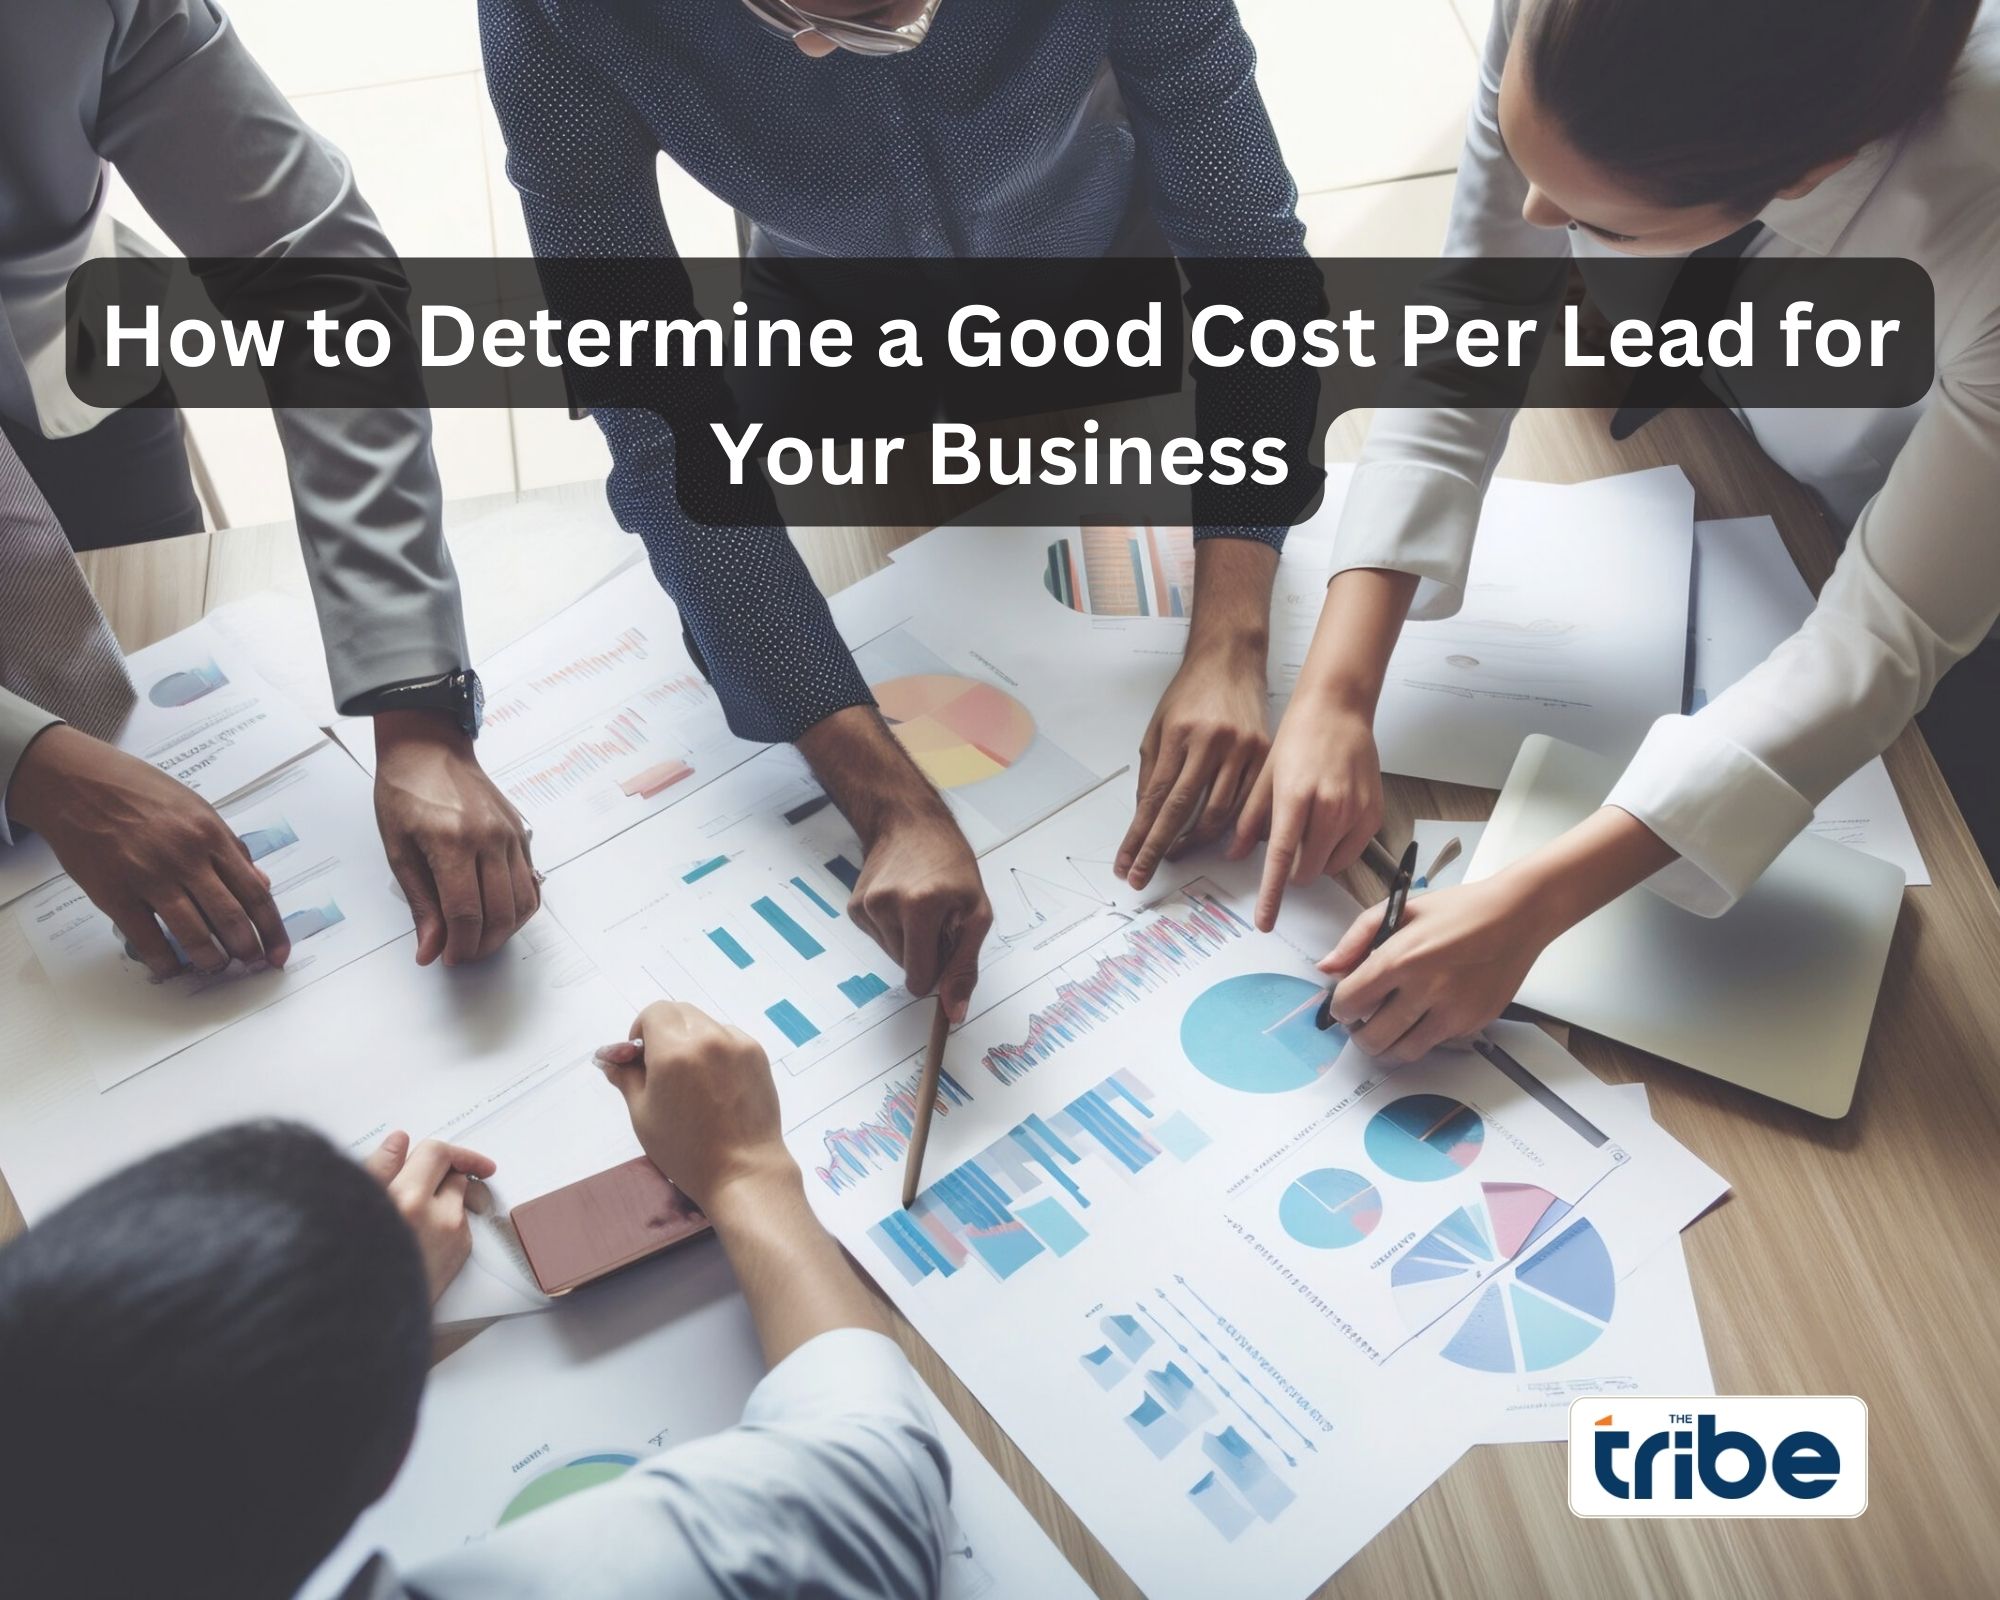 How to Determine a Good Cost Per Lead for Your Business